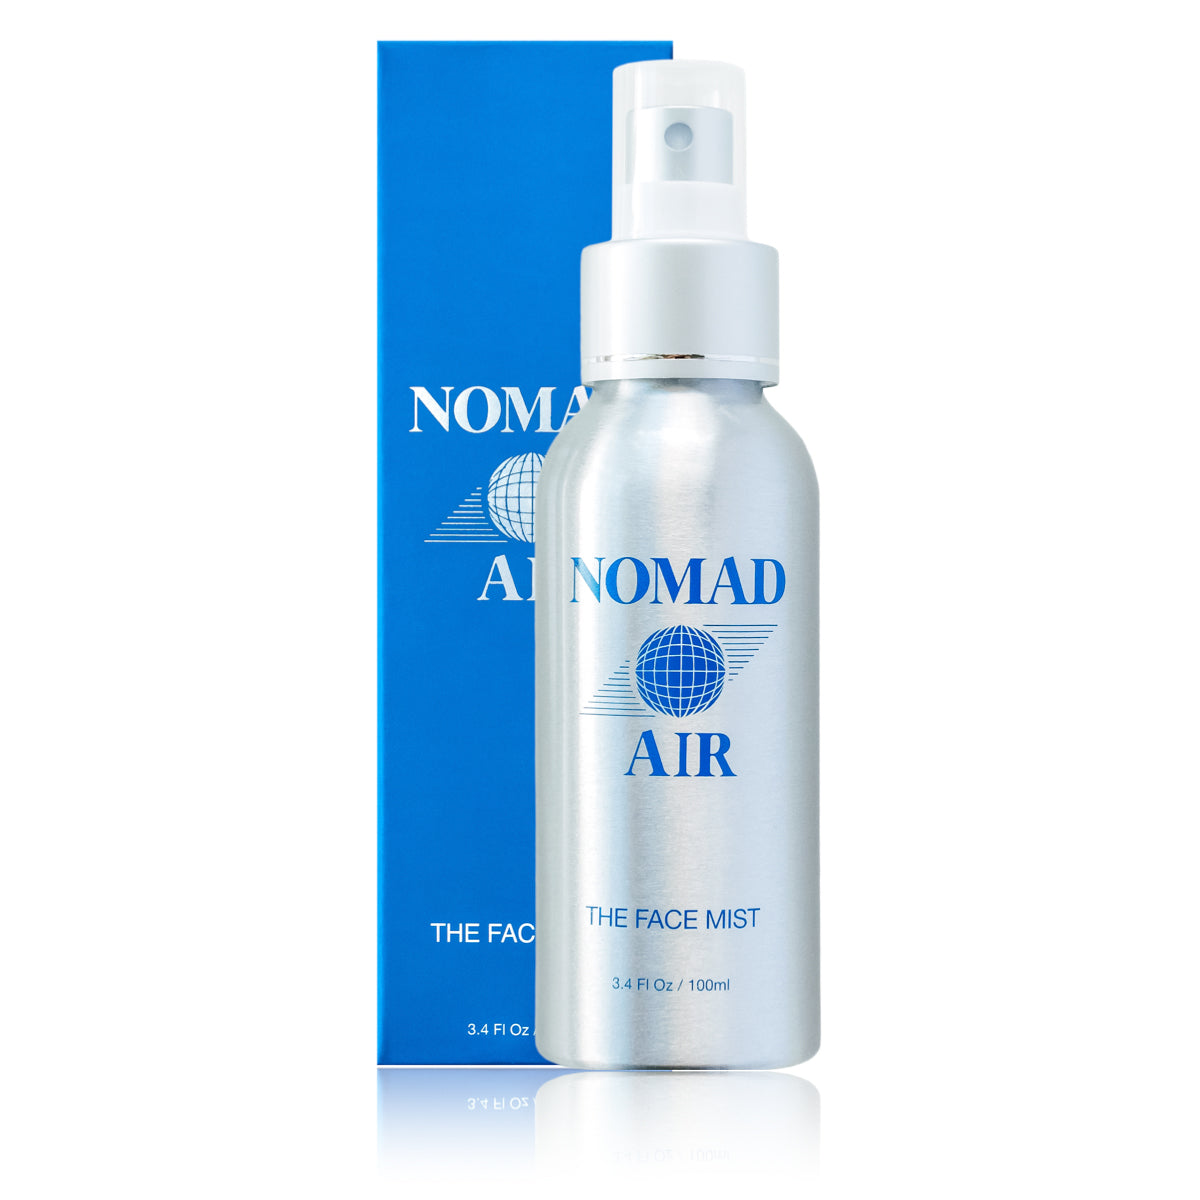 NOMAD Air - The Face Mist